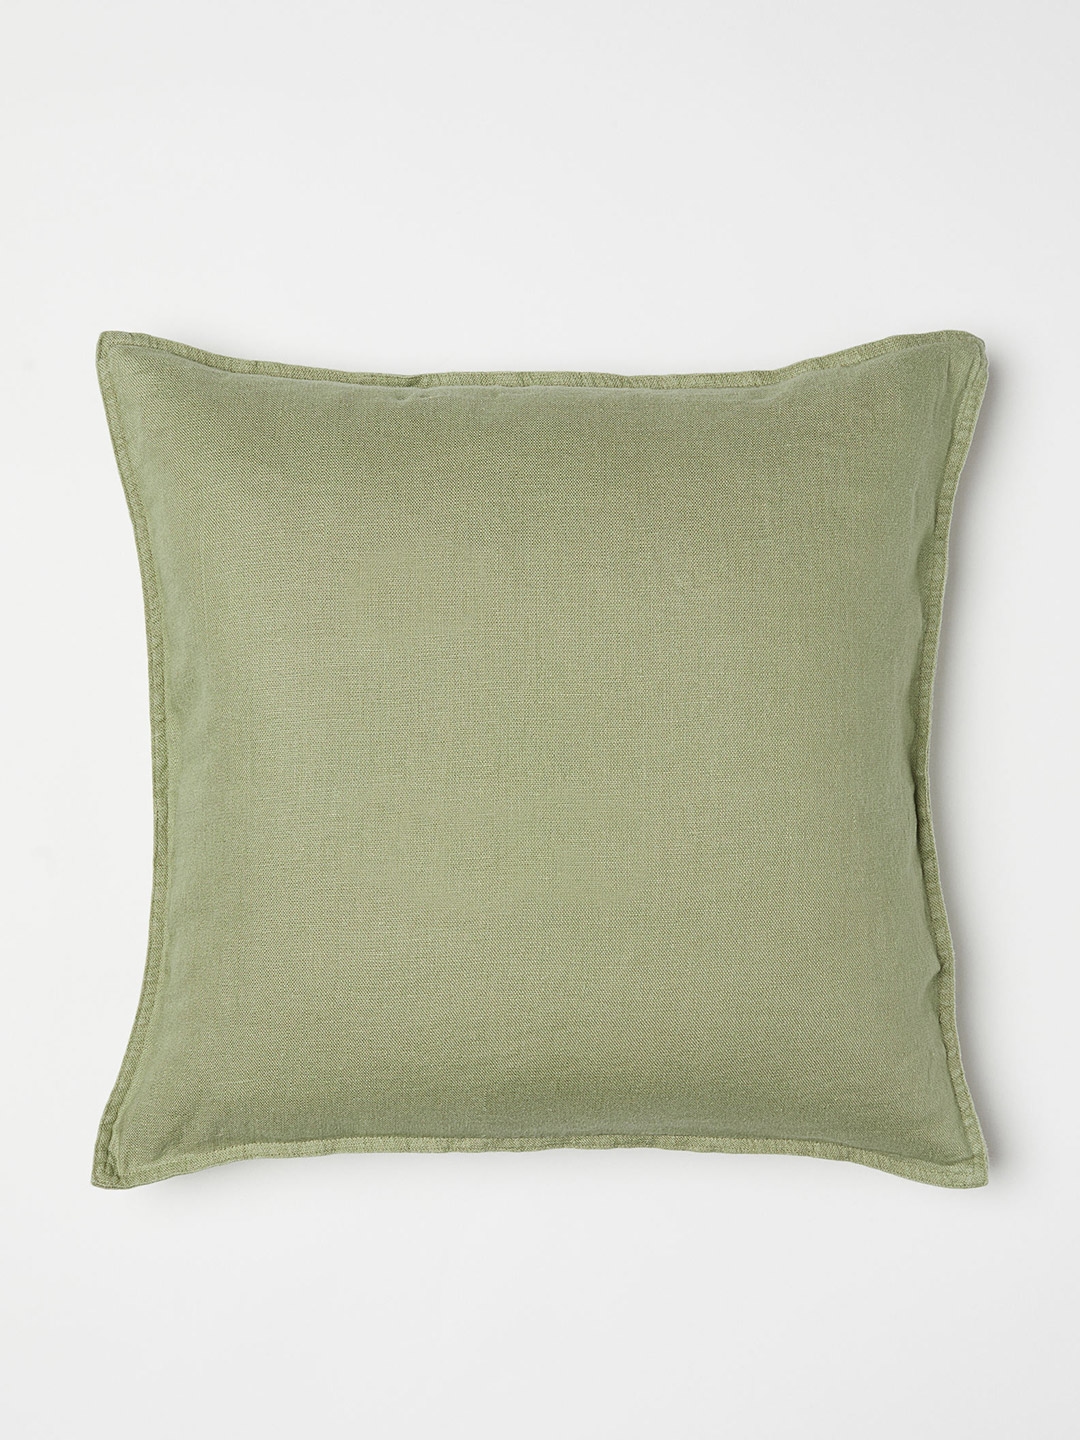 H&M Green Washed Linen Cushion Cover